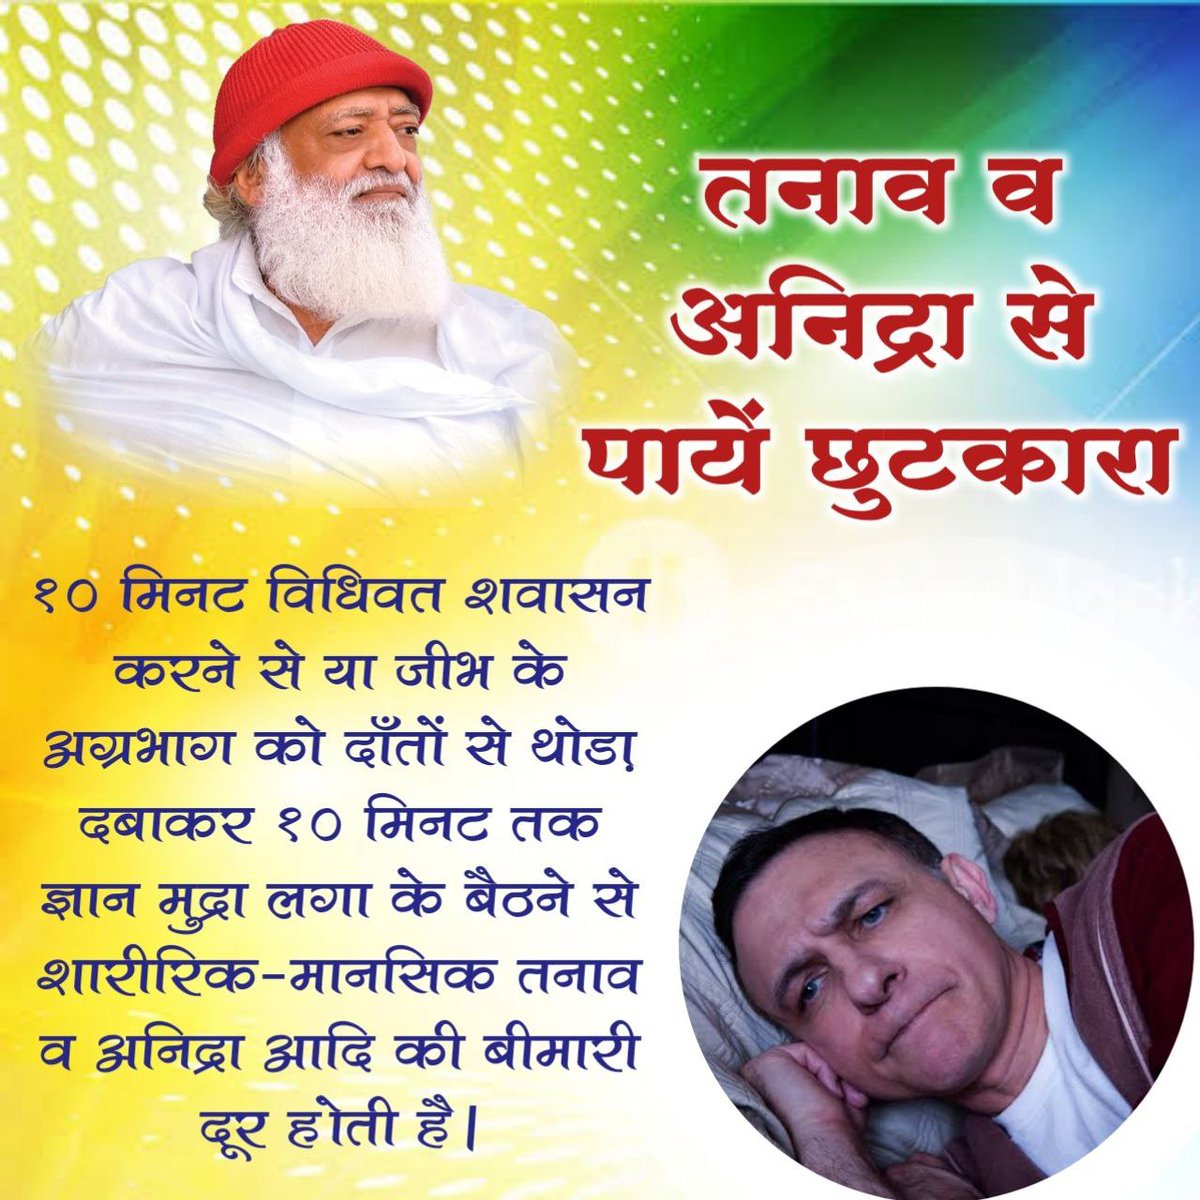 Qethwr it is stress, or any major ailment Ayurveda has caute for all,, it's a ancient science of treatment given to us by our greta rishi munis. Ayurveda hence truly refered as Treasure of Health Sant Shri Asharamji Bapu #AyurvedaForWellness Prakriti Ka Vardaan